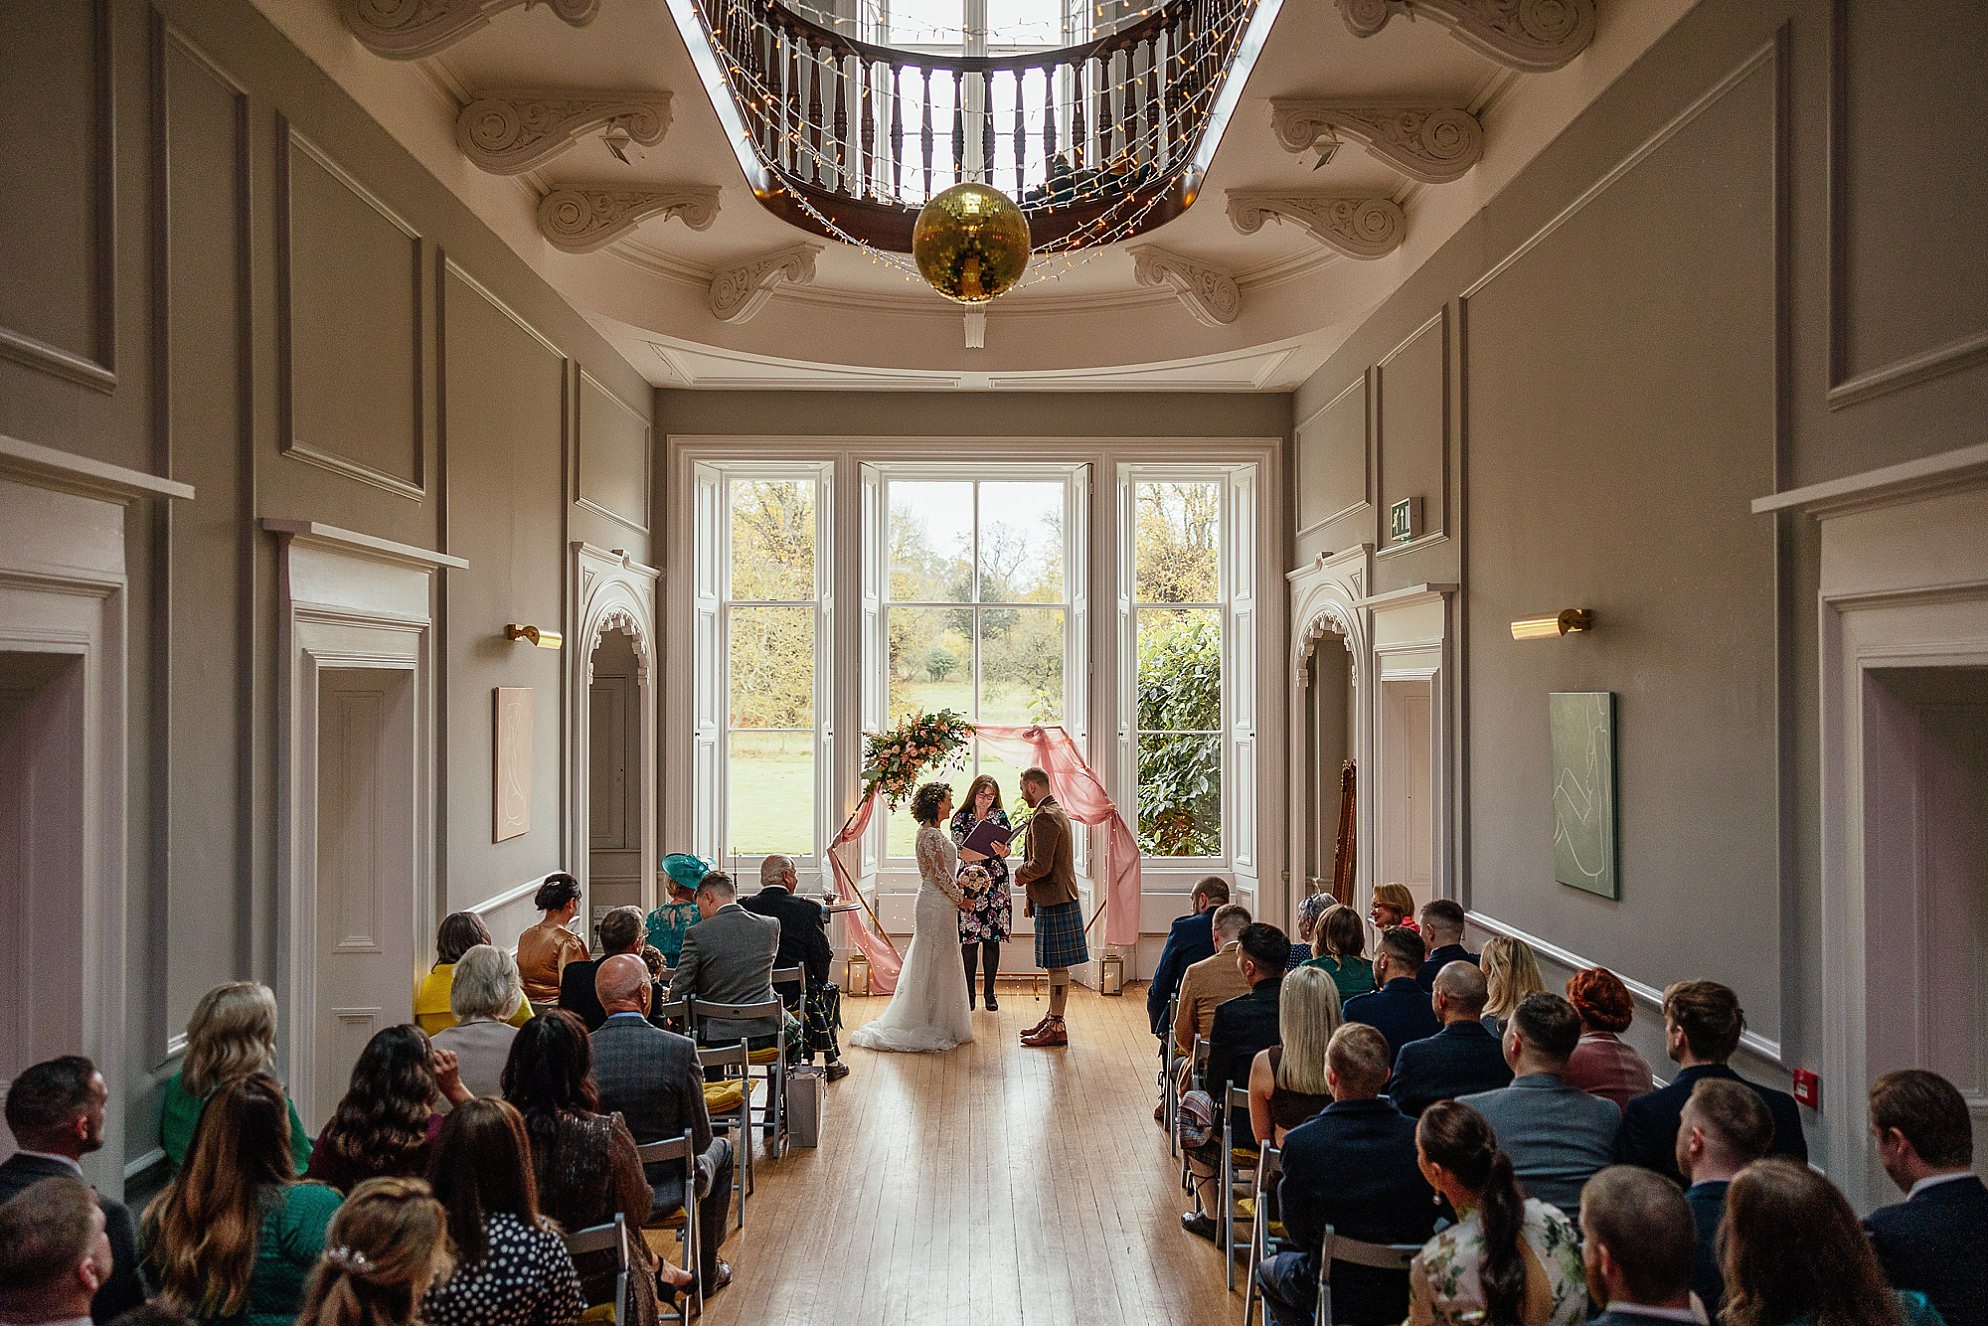 Interior inside grand hall DIY wedding venue at Netherbyres House near Eyemouth in Scotland Fiona Flanagan Humanist performs the ceremony with bride and groom at a colourful geometric wedding arch decked with flowers by Occasions of Eyemouth Florist gold mirrorball white fairy lights and abstract modern art mix perfectly with the period features of the traditional victorian stately house rear view of guests as they watch seated in sea-grey folding wooden seats with mustard cushions traditional victorian cornicing sash windows and modern art